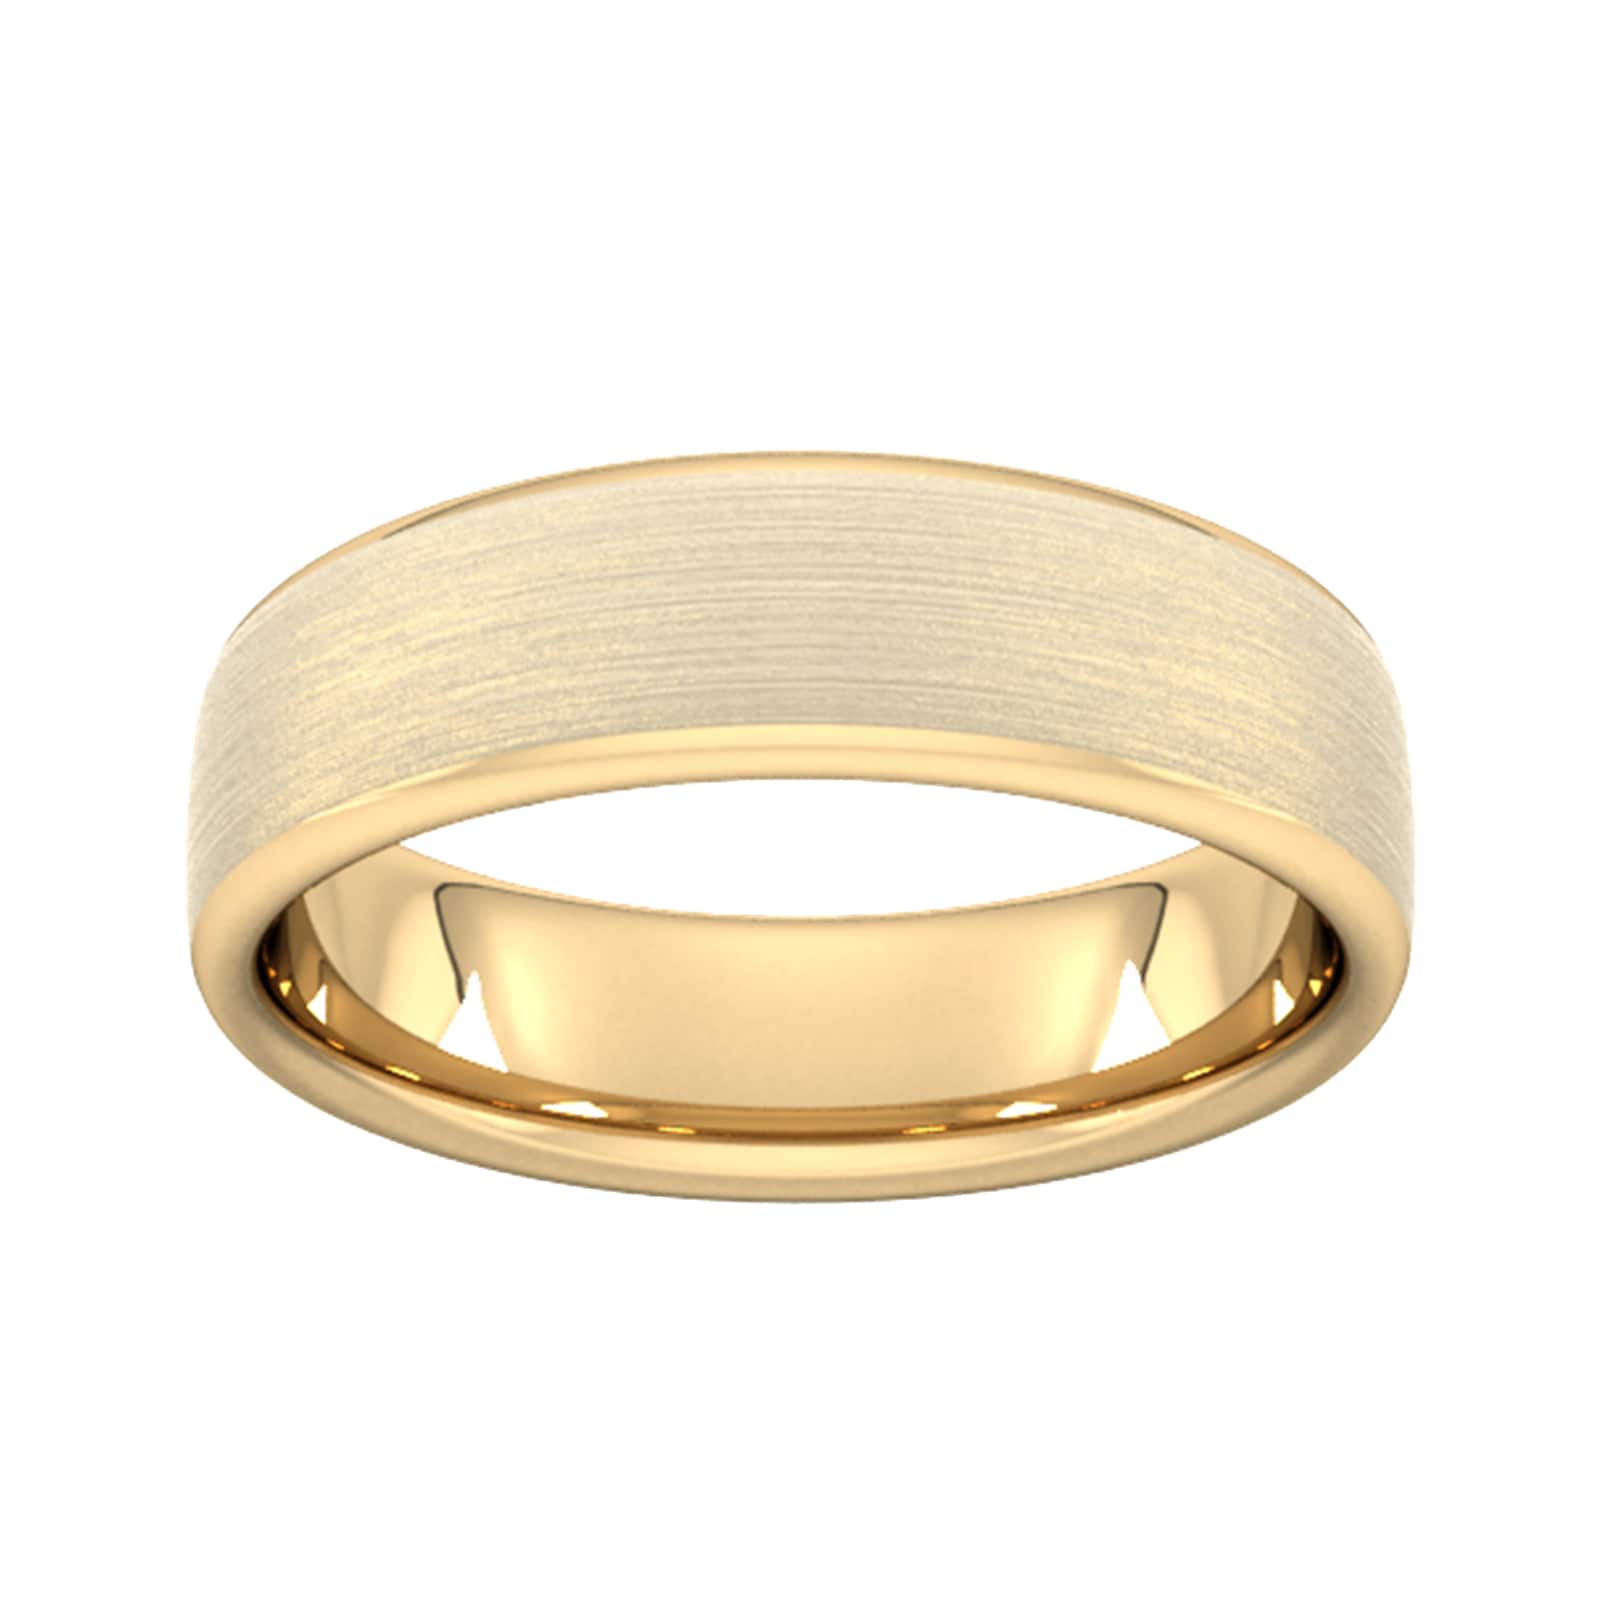 6mm Slight Court Extra Heavy Matt Finished Wedding Ring In 18 Carat Yellow Gold - Ring Size Z